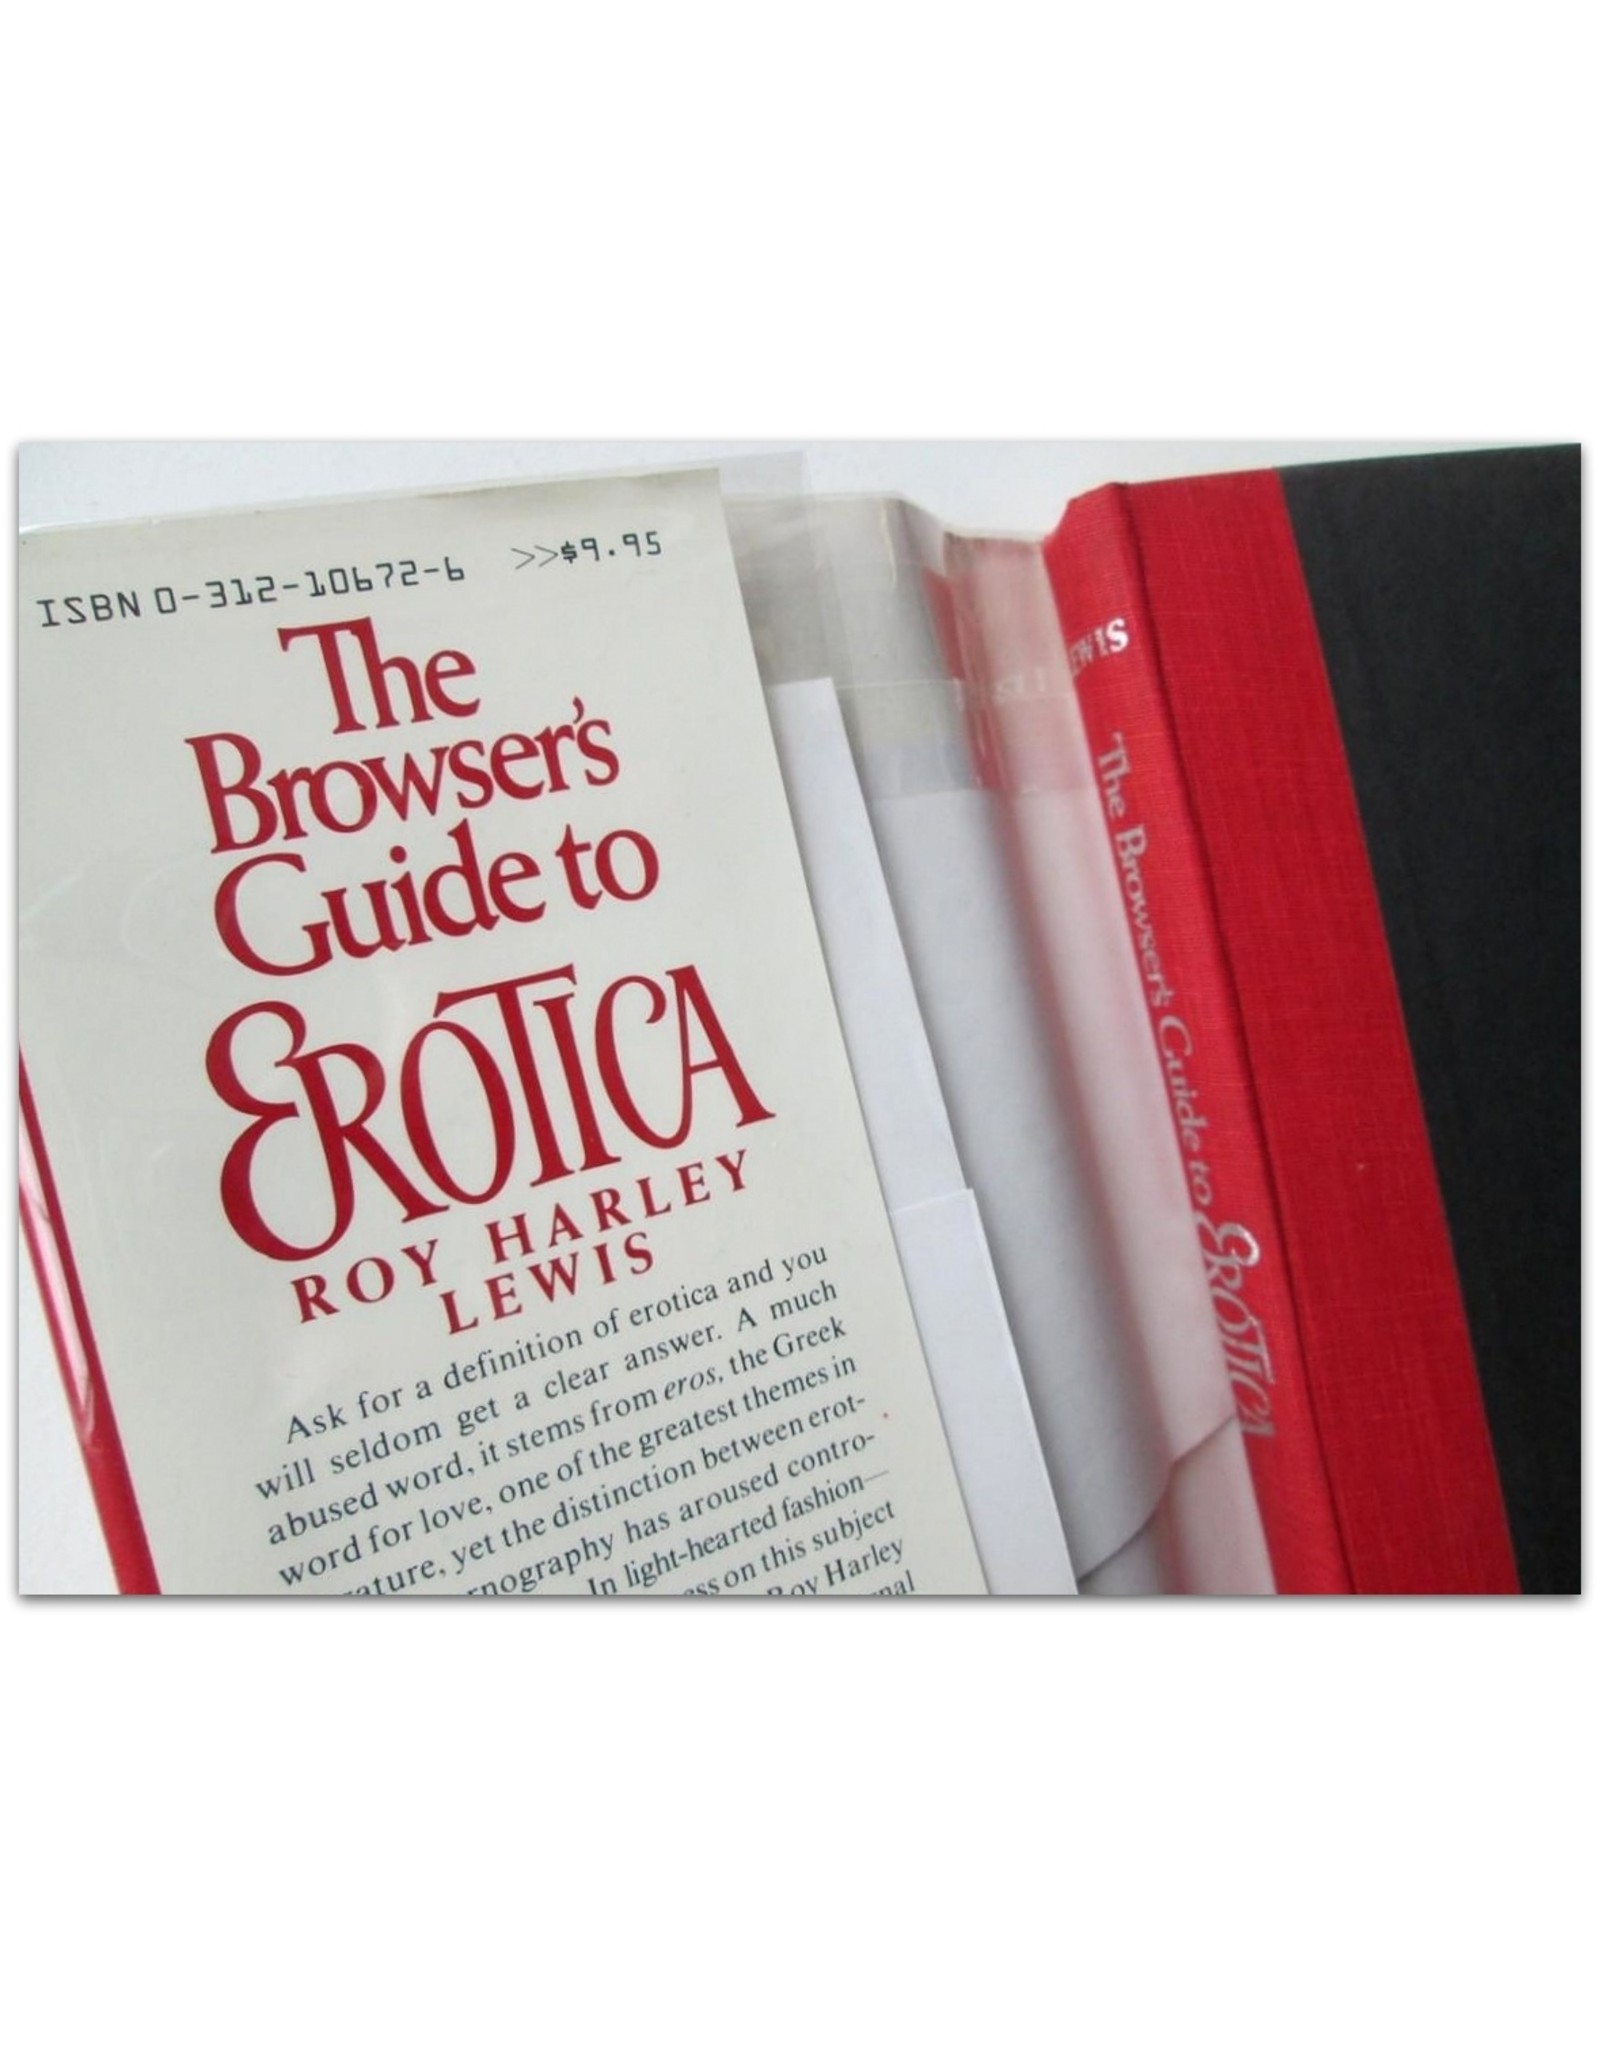 Roy Harley Lewis - The Browser's Guide to Erotica